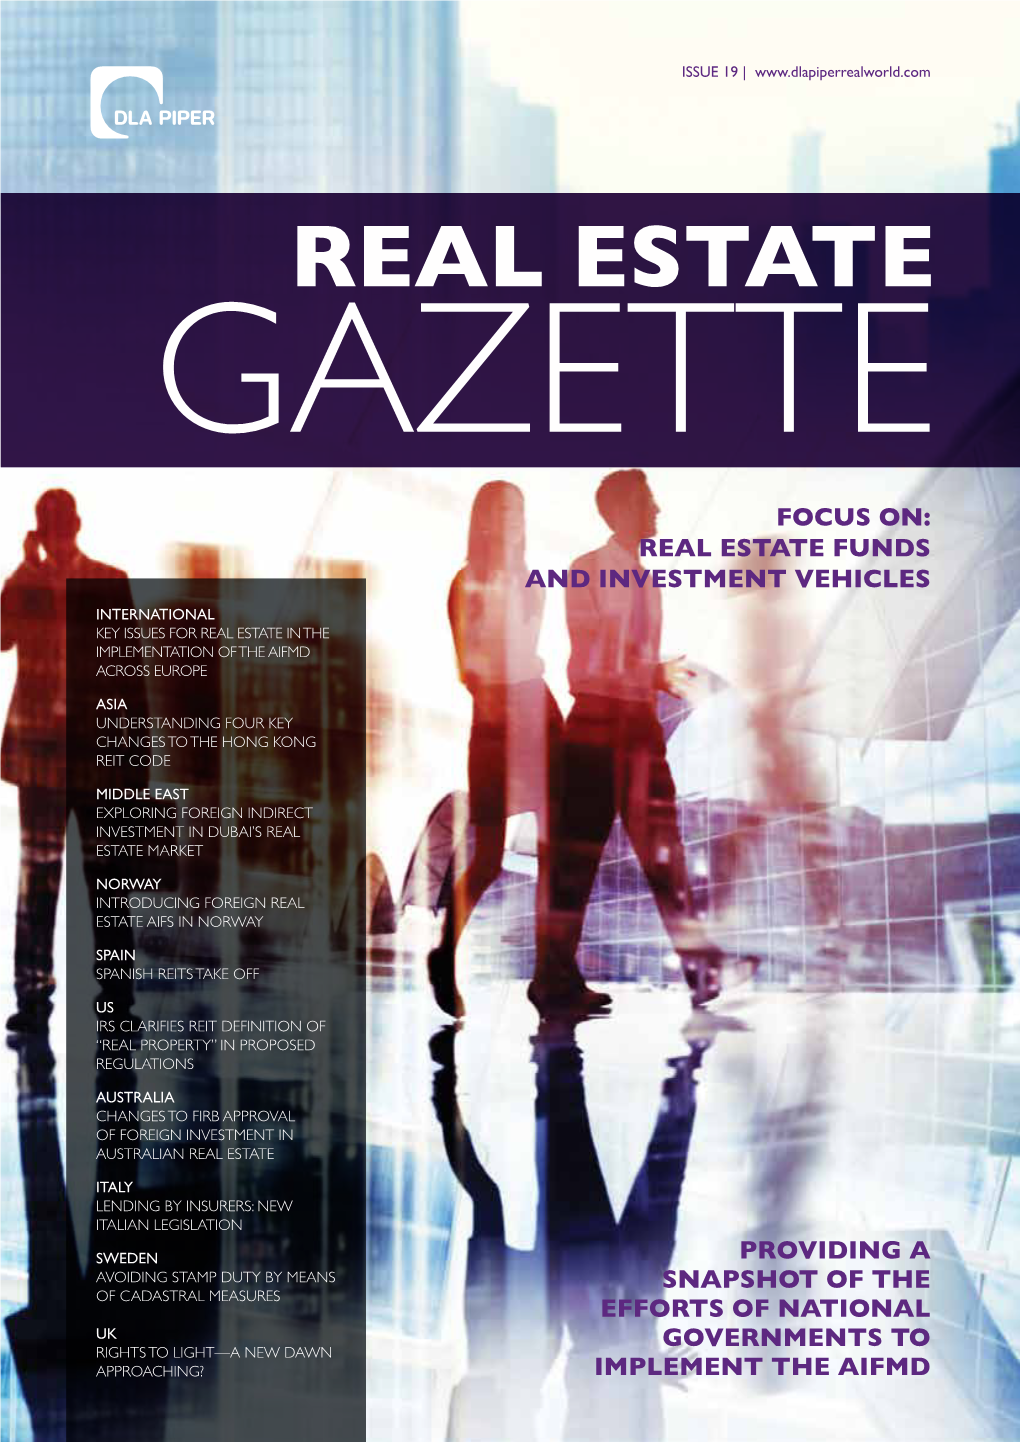 Real Estate Gazette FOCUS ON: REAL ESTATE FUNDS and INVESTMENT VEHICLES International KEY ISSUES for REAL ESTATE in the IMPLEMENTATION of the AIFMD ACROSS Europe